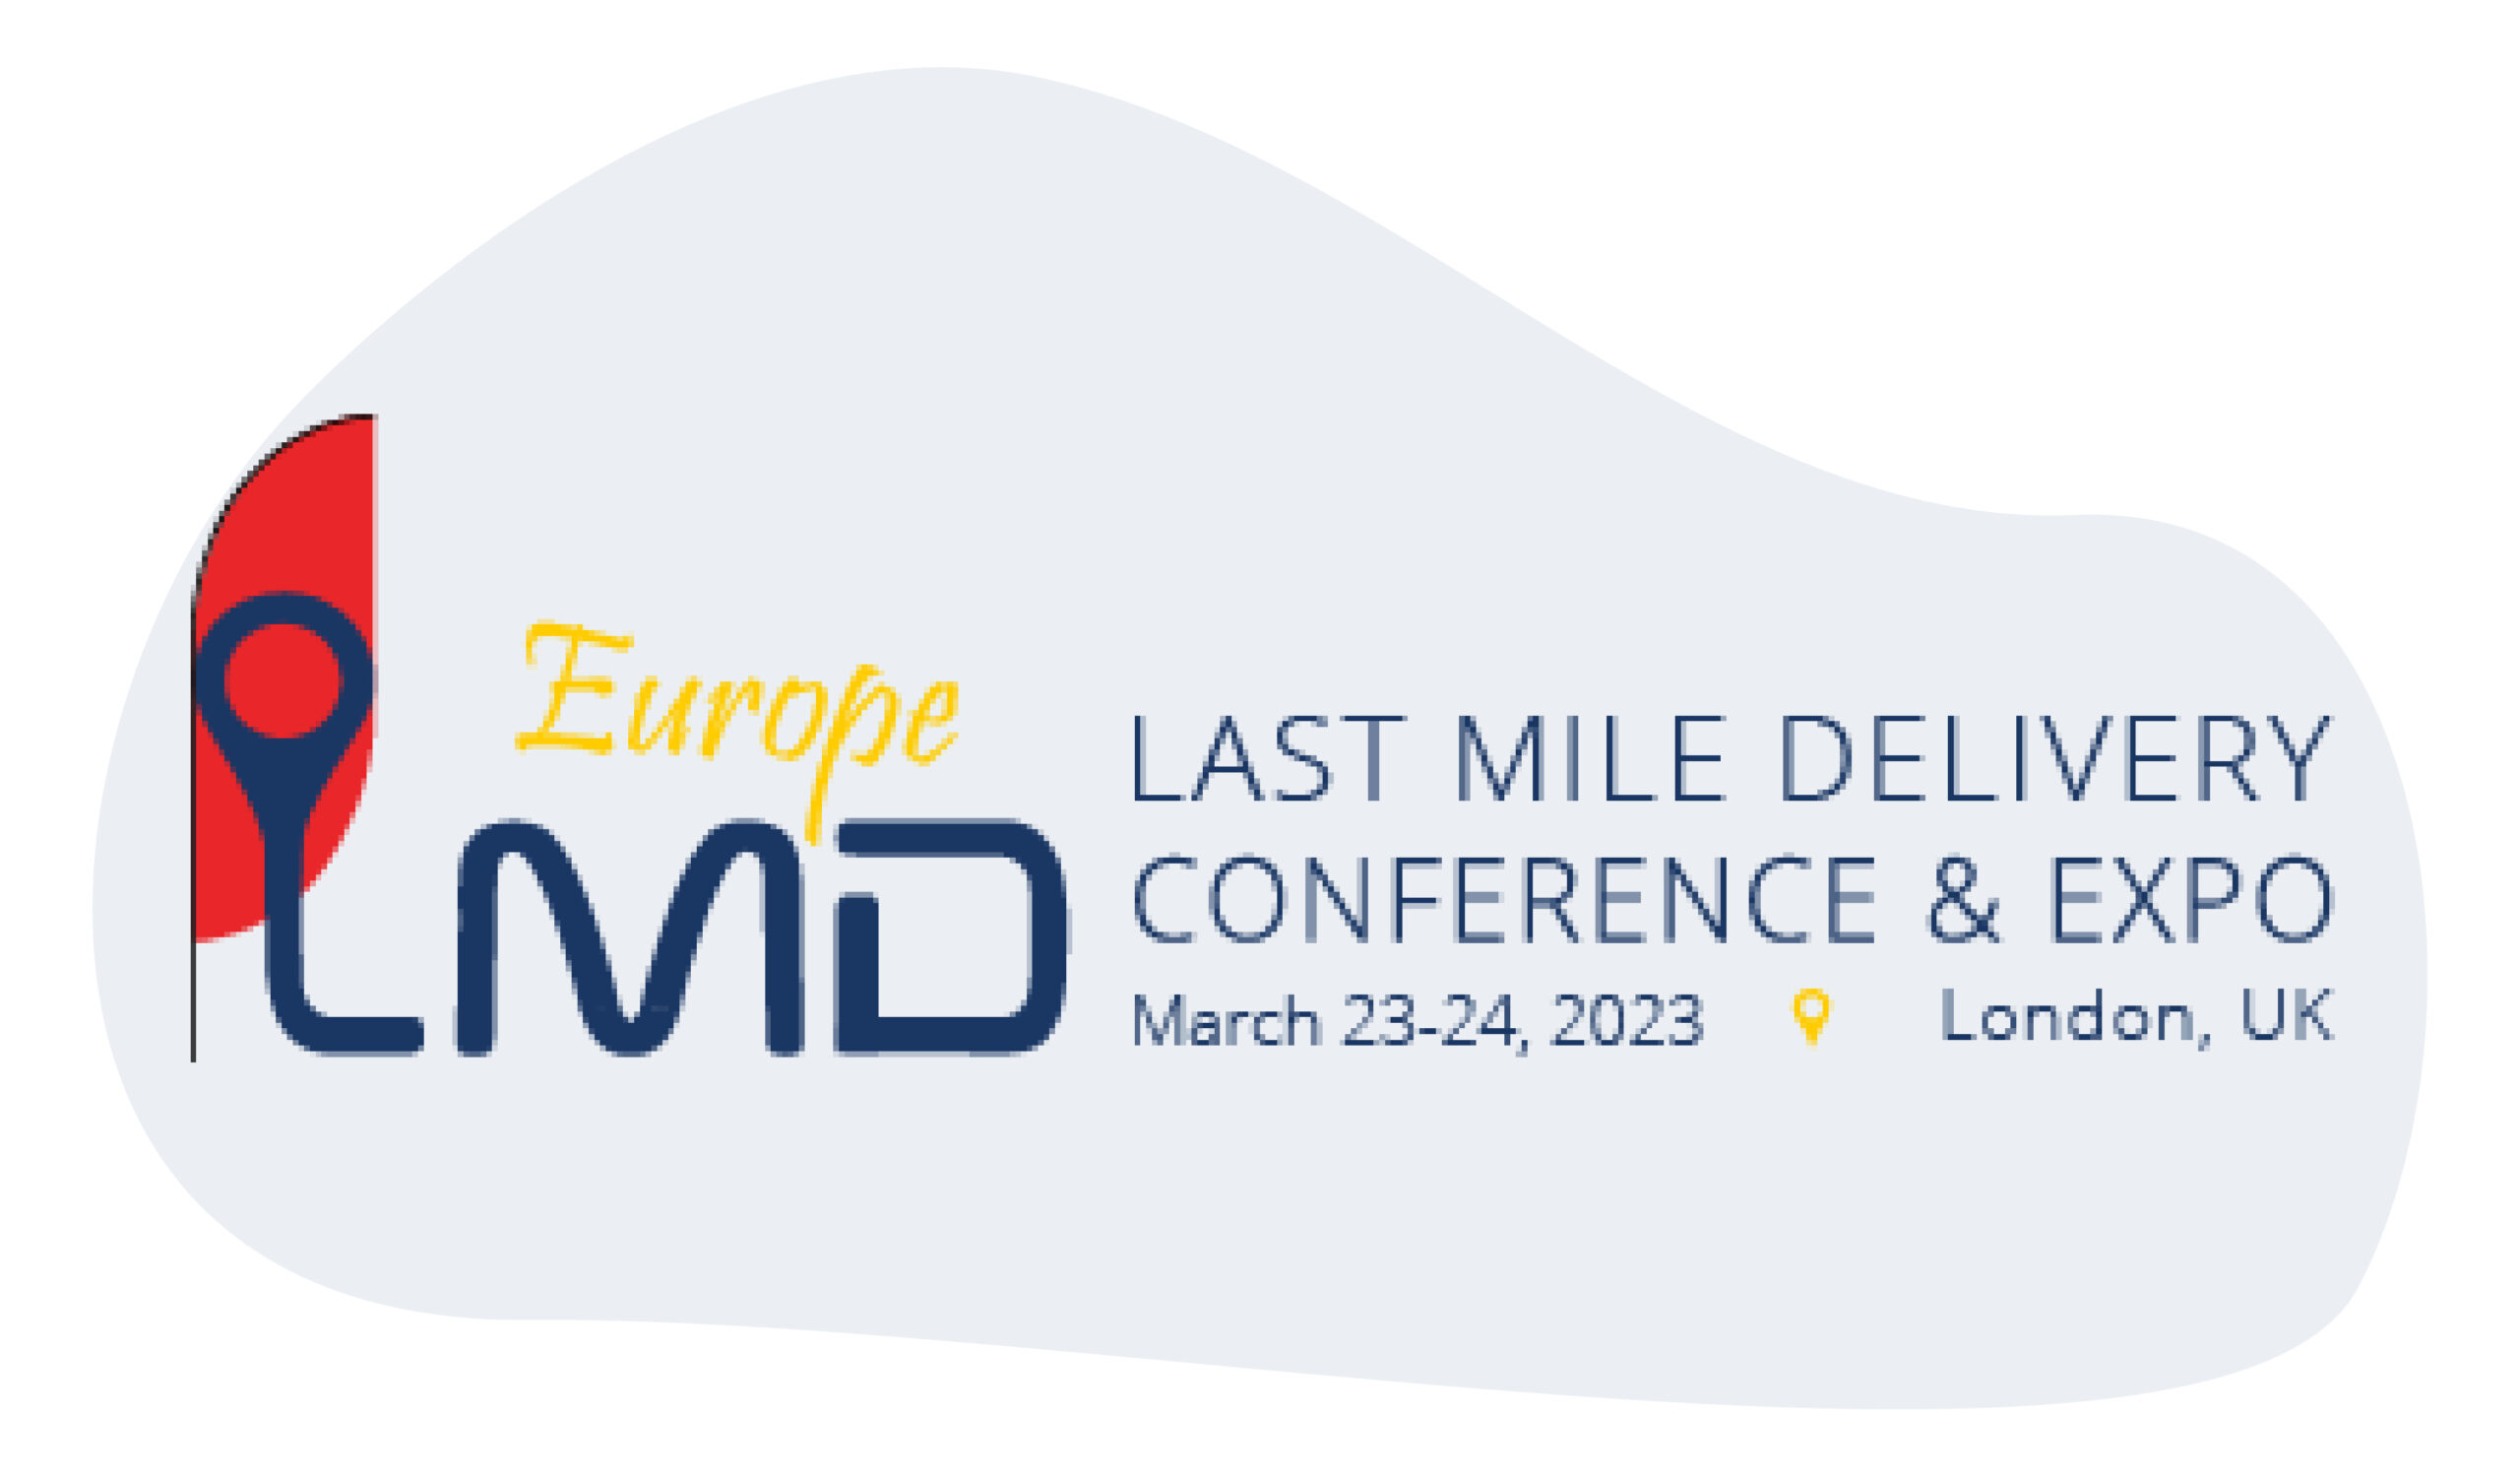 https://www.dropoff.com/wp-content/uploads/2023/01/10-Last-Mile-Delivery-Conferences-and-Events-Planned-For-2023-02-scaled.jpg